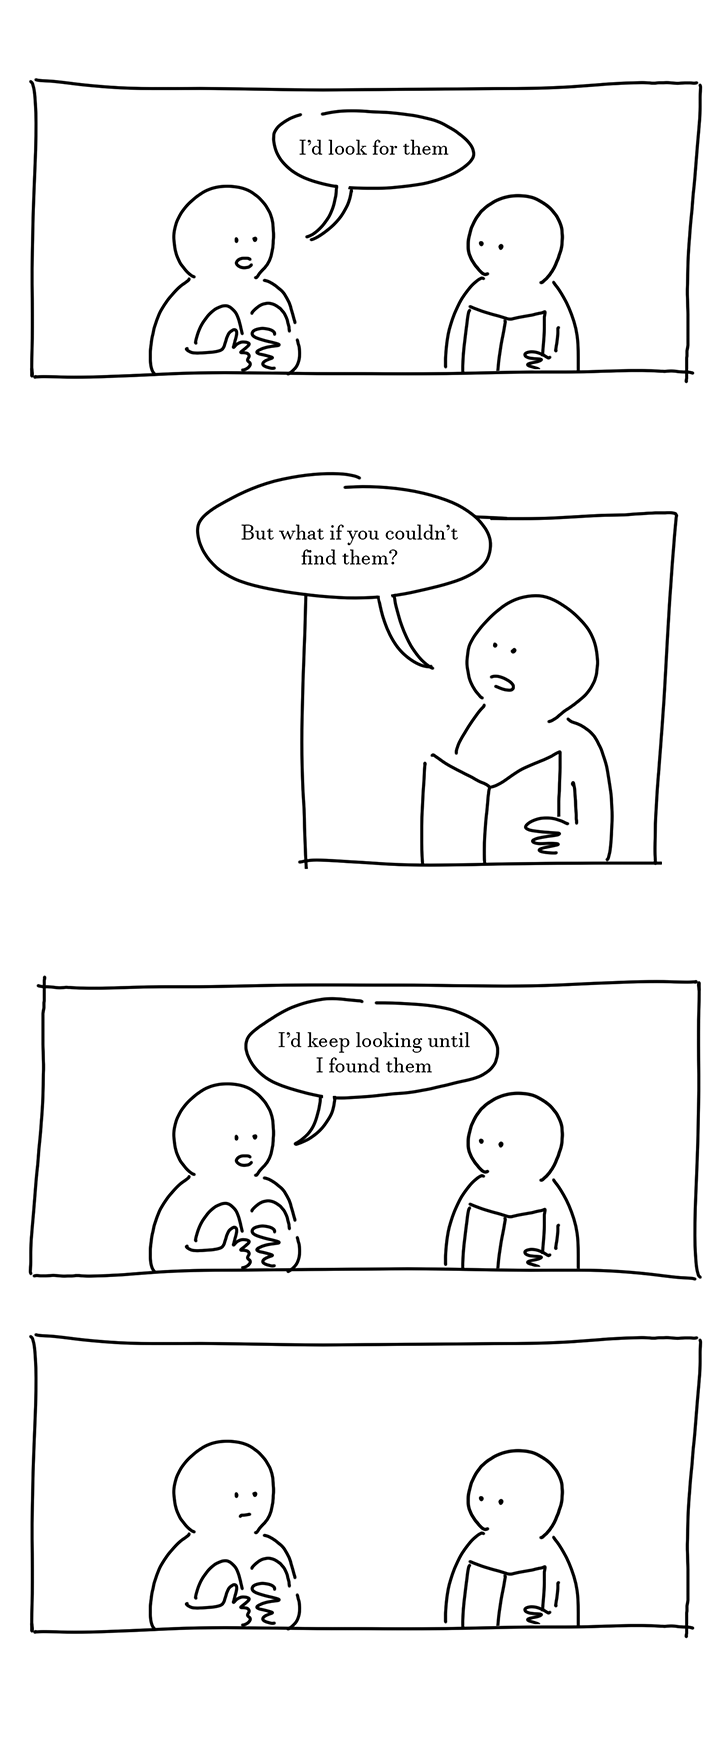 Panel 13: Kid on the left says, "I'd look for them."
Panel 14: Kid on the right says, "But what if you couldn't find them?"
Panel 15: Kid on the left says without changing their expression, "I'd keep looking until I found them."
Panel 16: The two kids look at each other without moving.